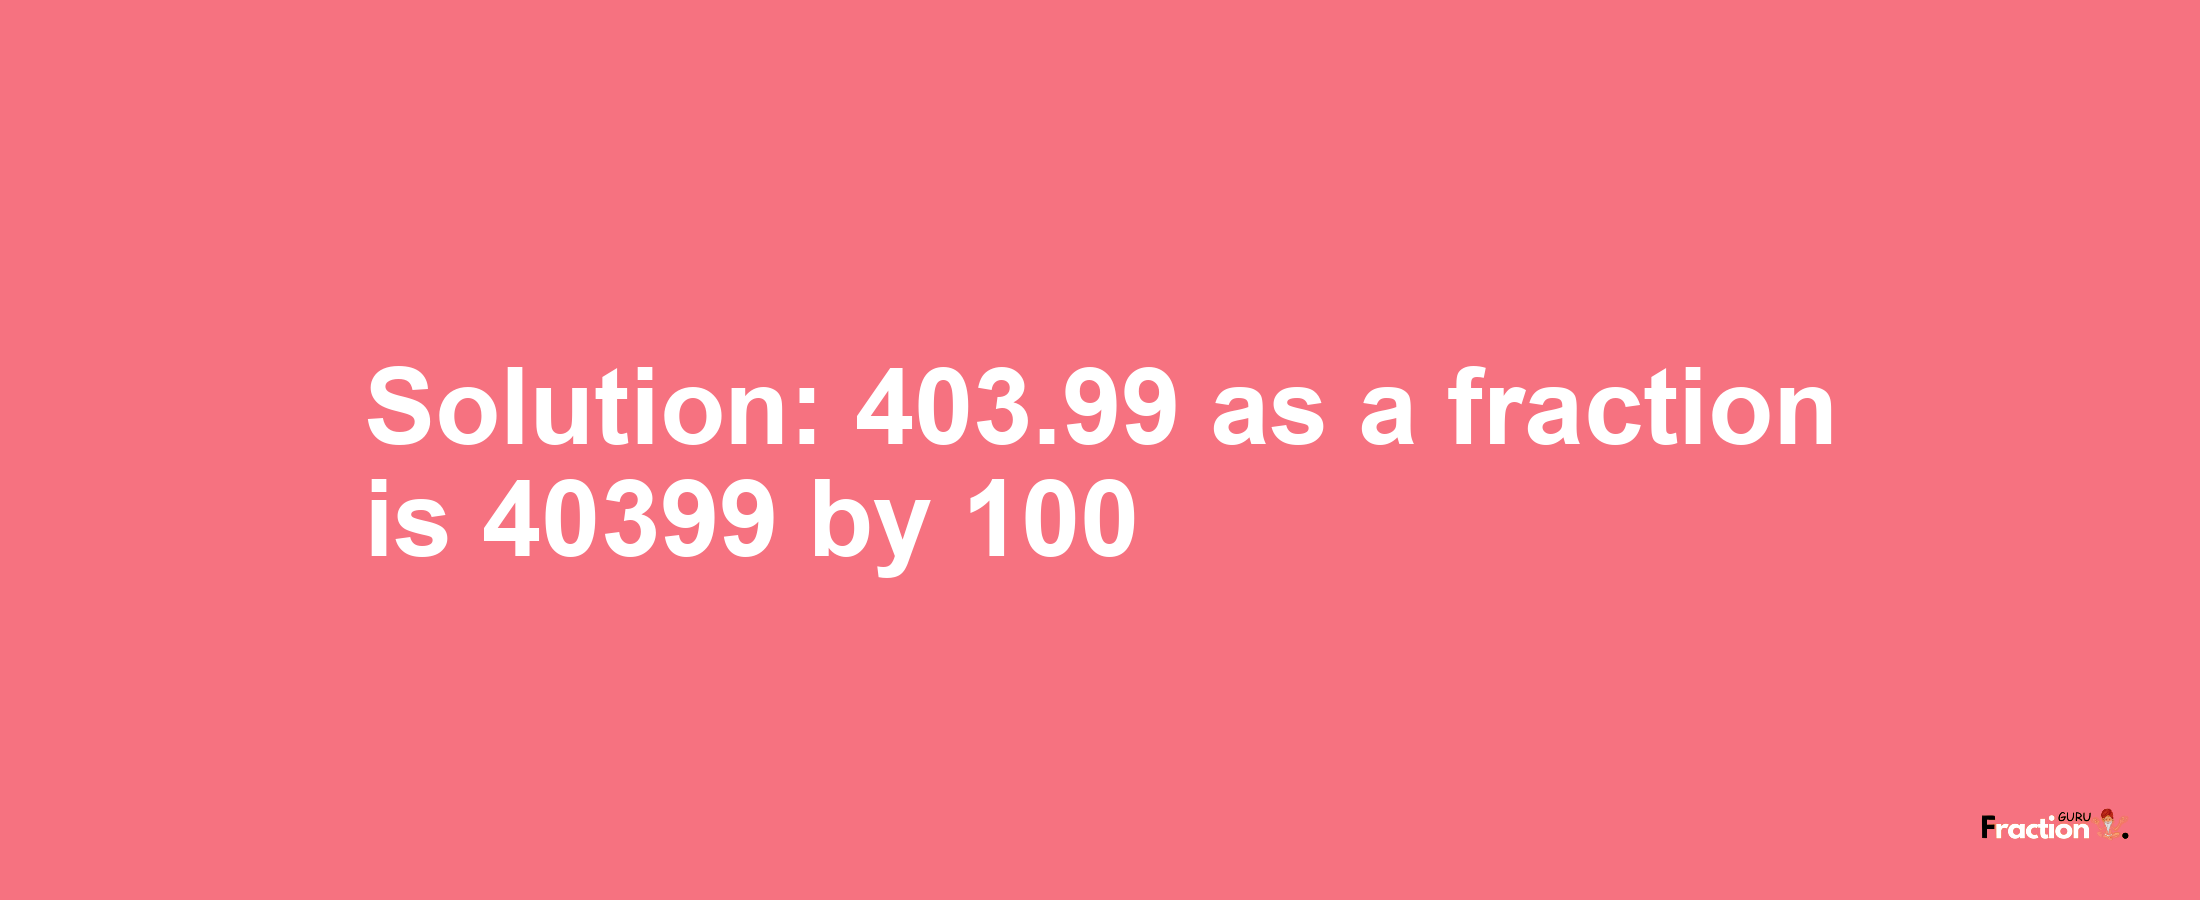 Solution:403.99 as a fraction is 40399/100